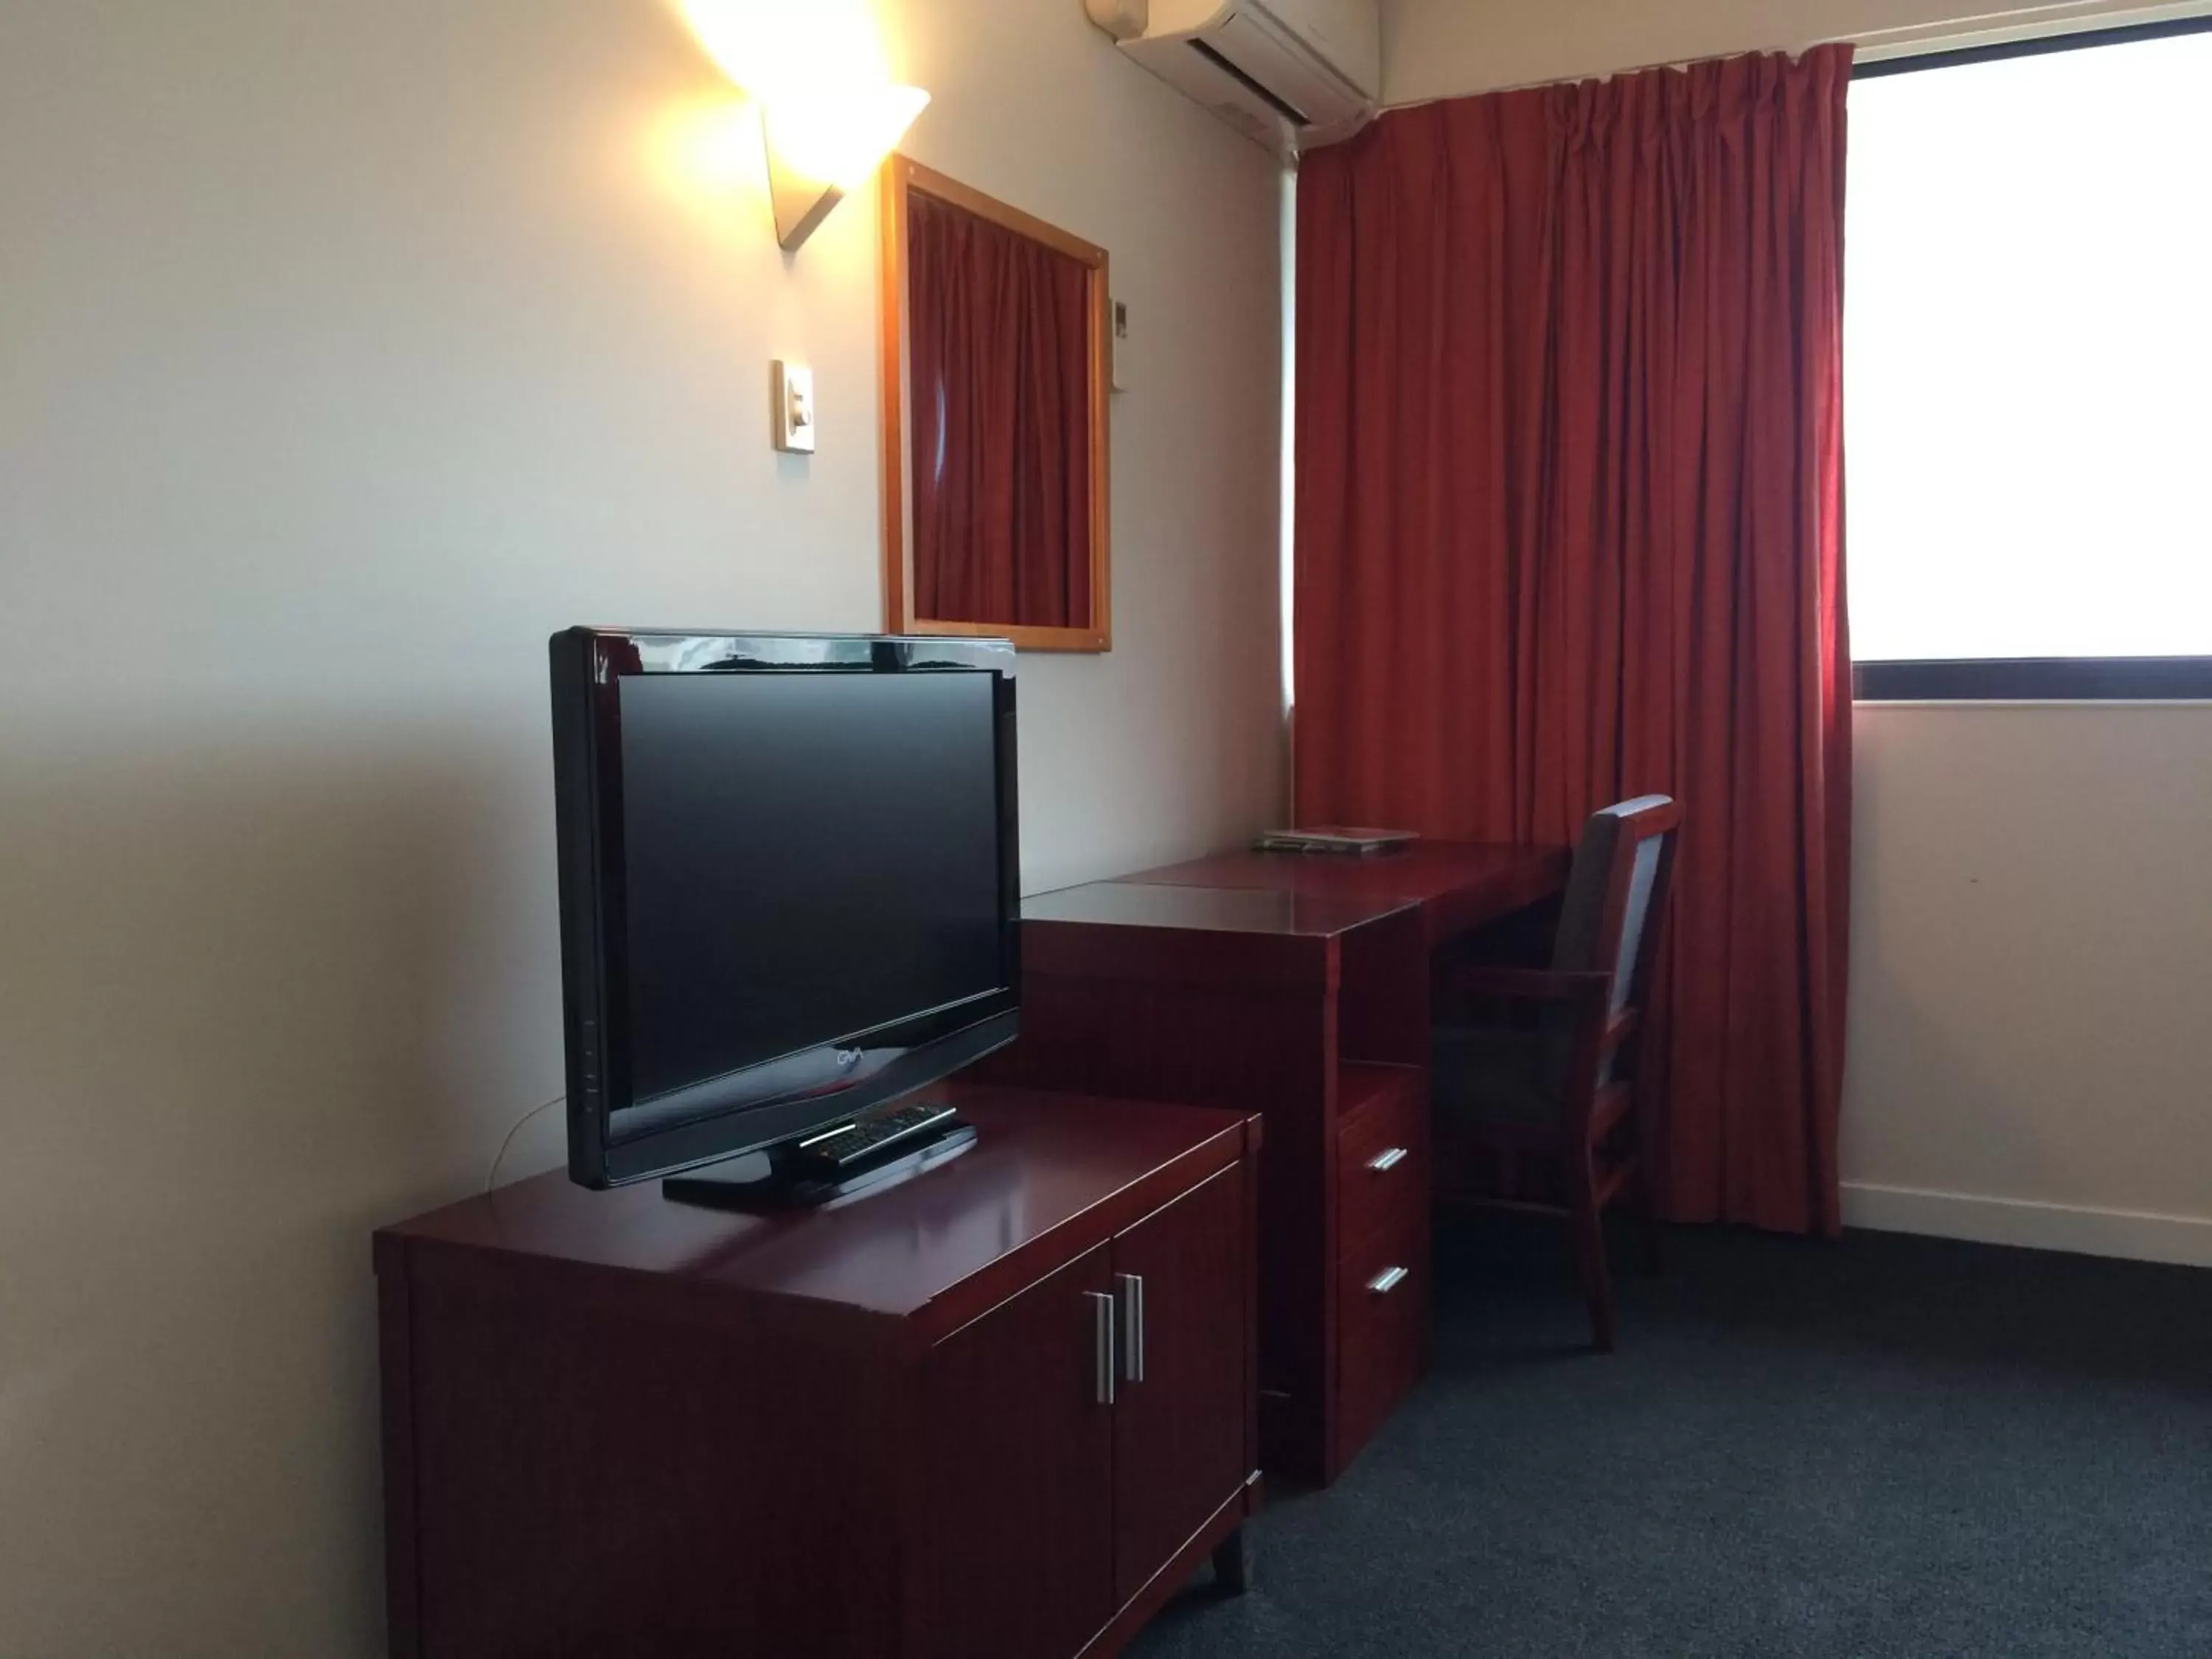 TV and multimedia, TV/Entertainment Center in Chifley Plaza Townsville